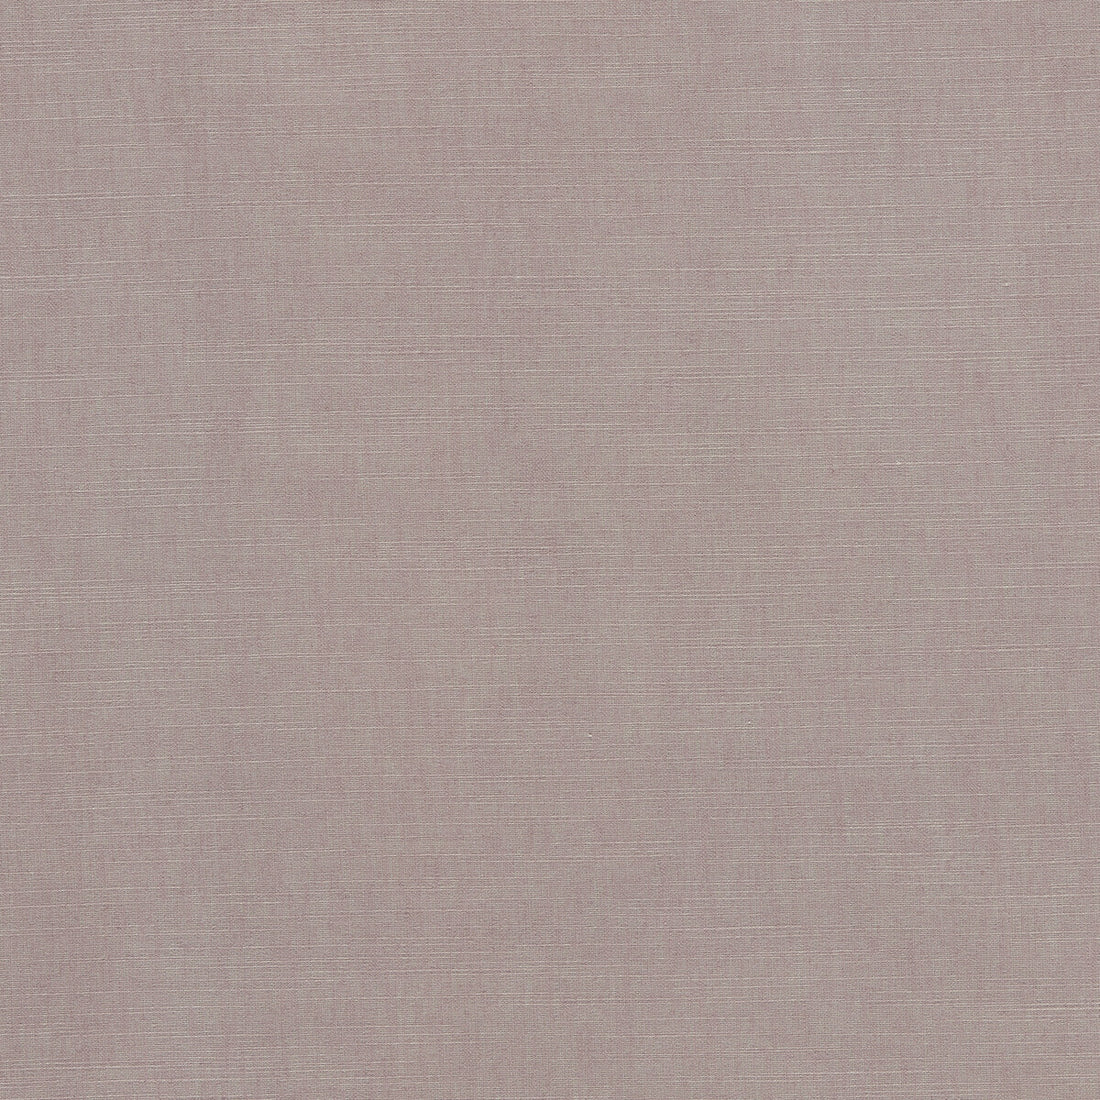 Paradiso fabric in blush color - pattern F1707/03.CAC.0 - by Clarke And Clarke in the Breegan Jane Fabrics collection